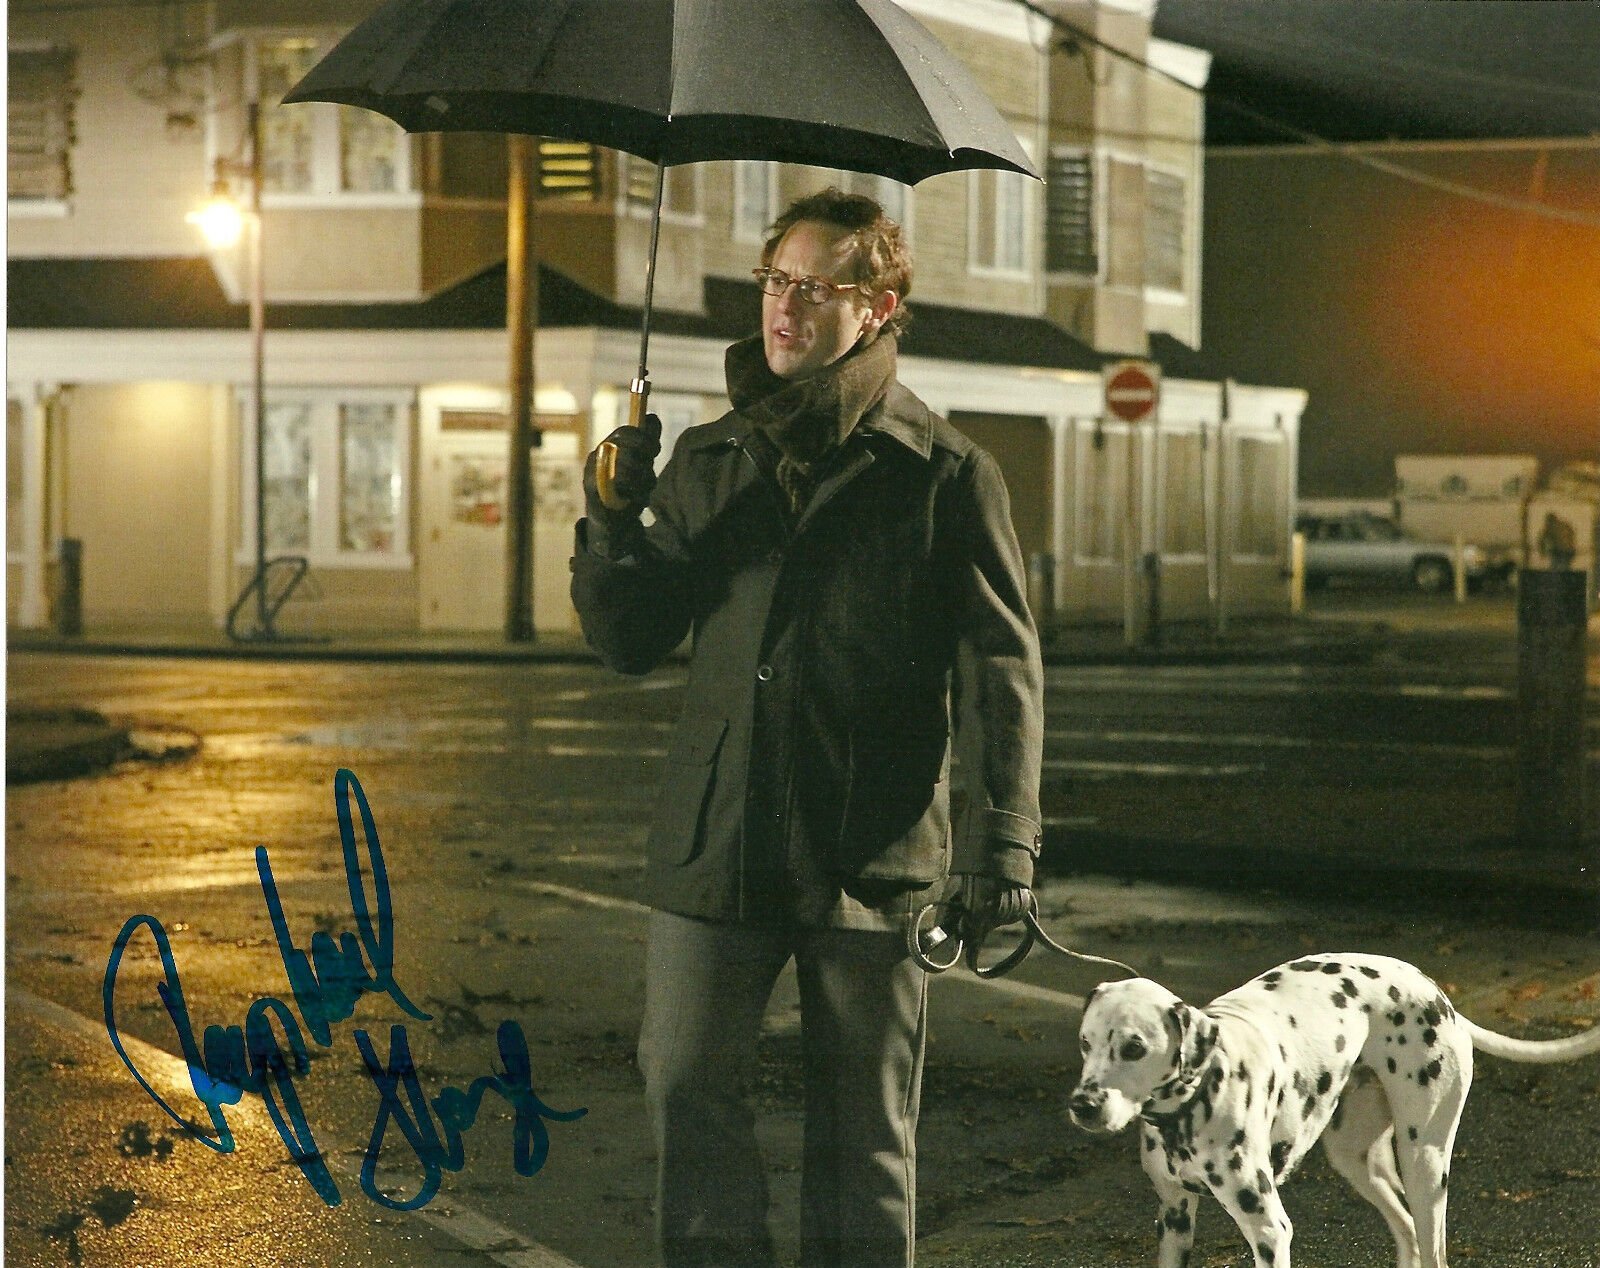 Once Upon A Time Raphael Sbarge Signed Autographed 8x10 Photo Poster painting COA